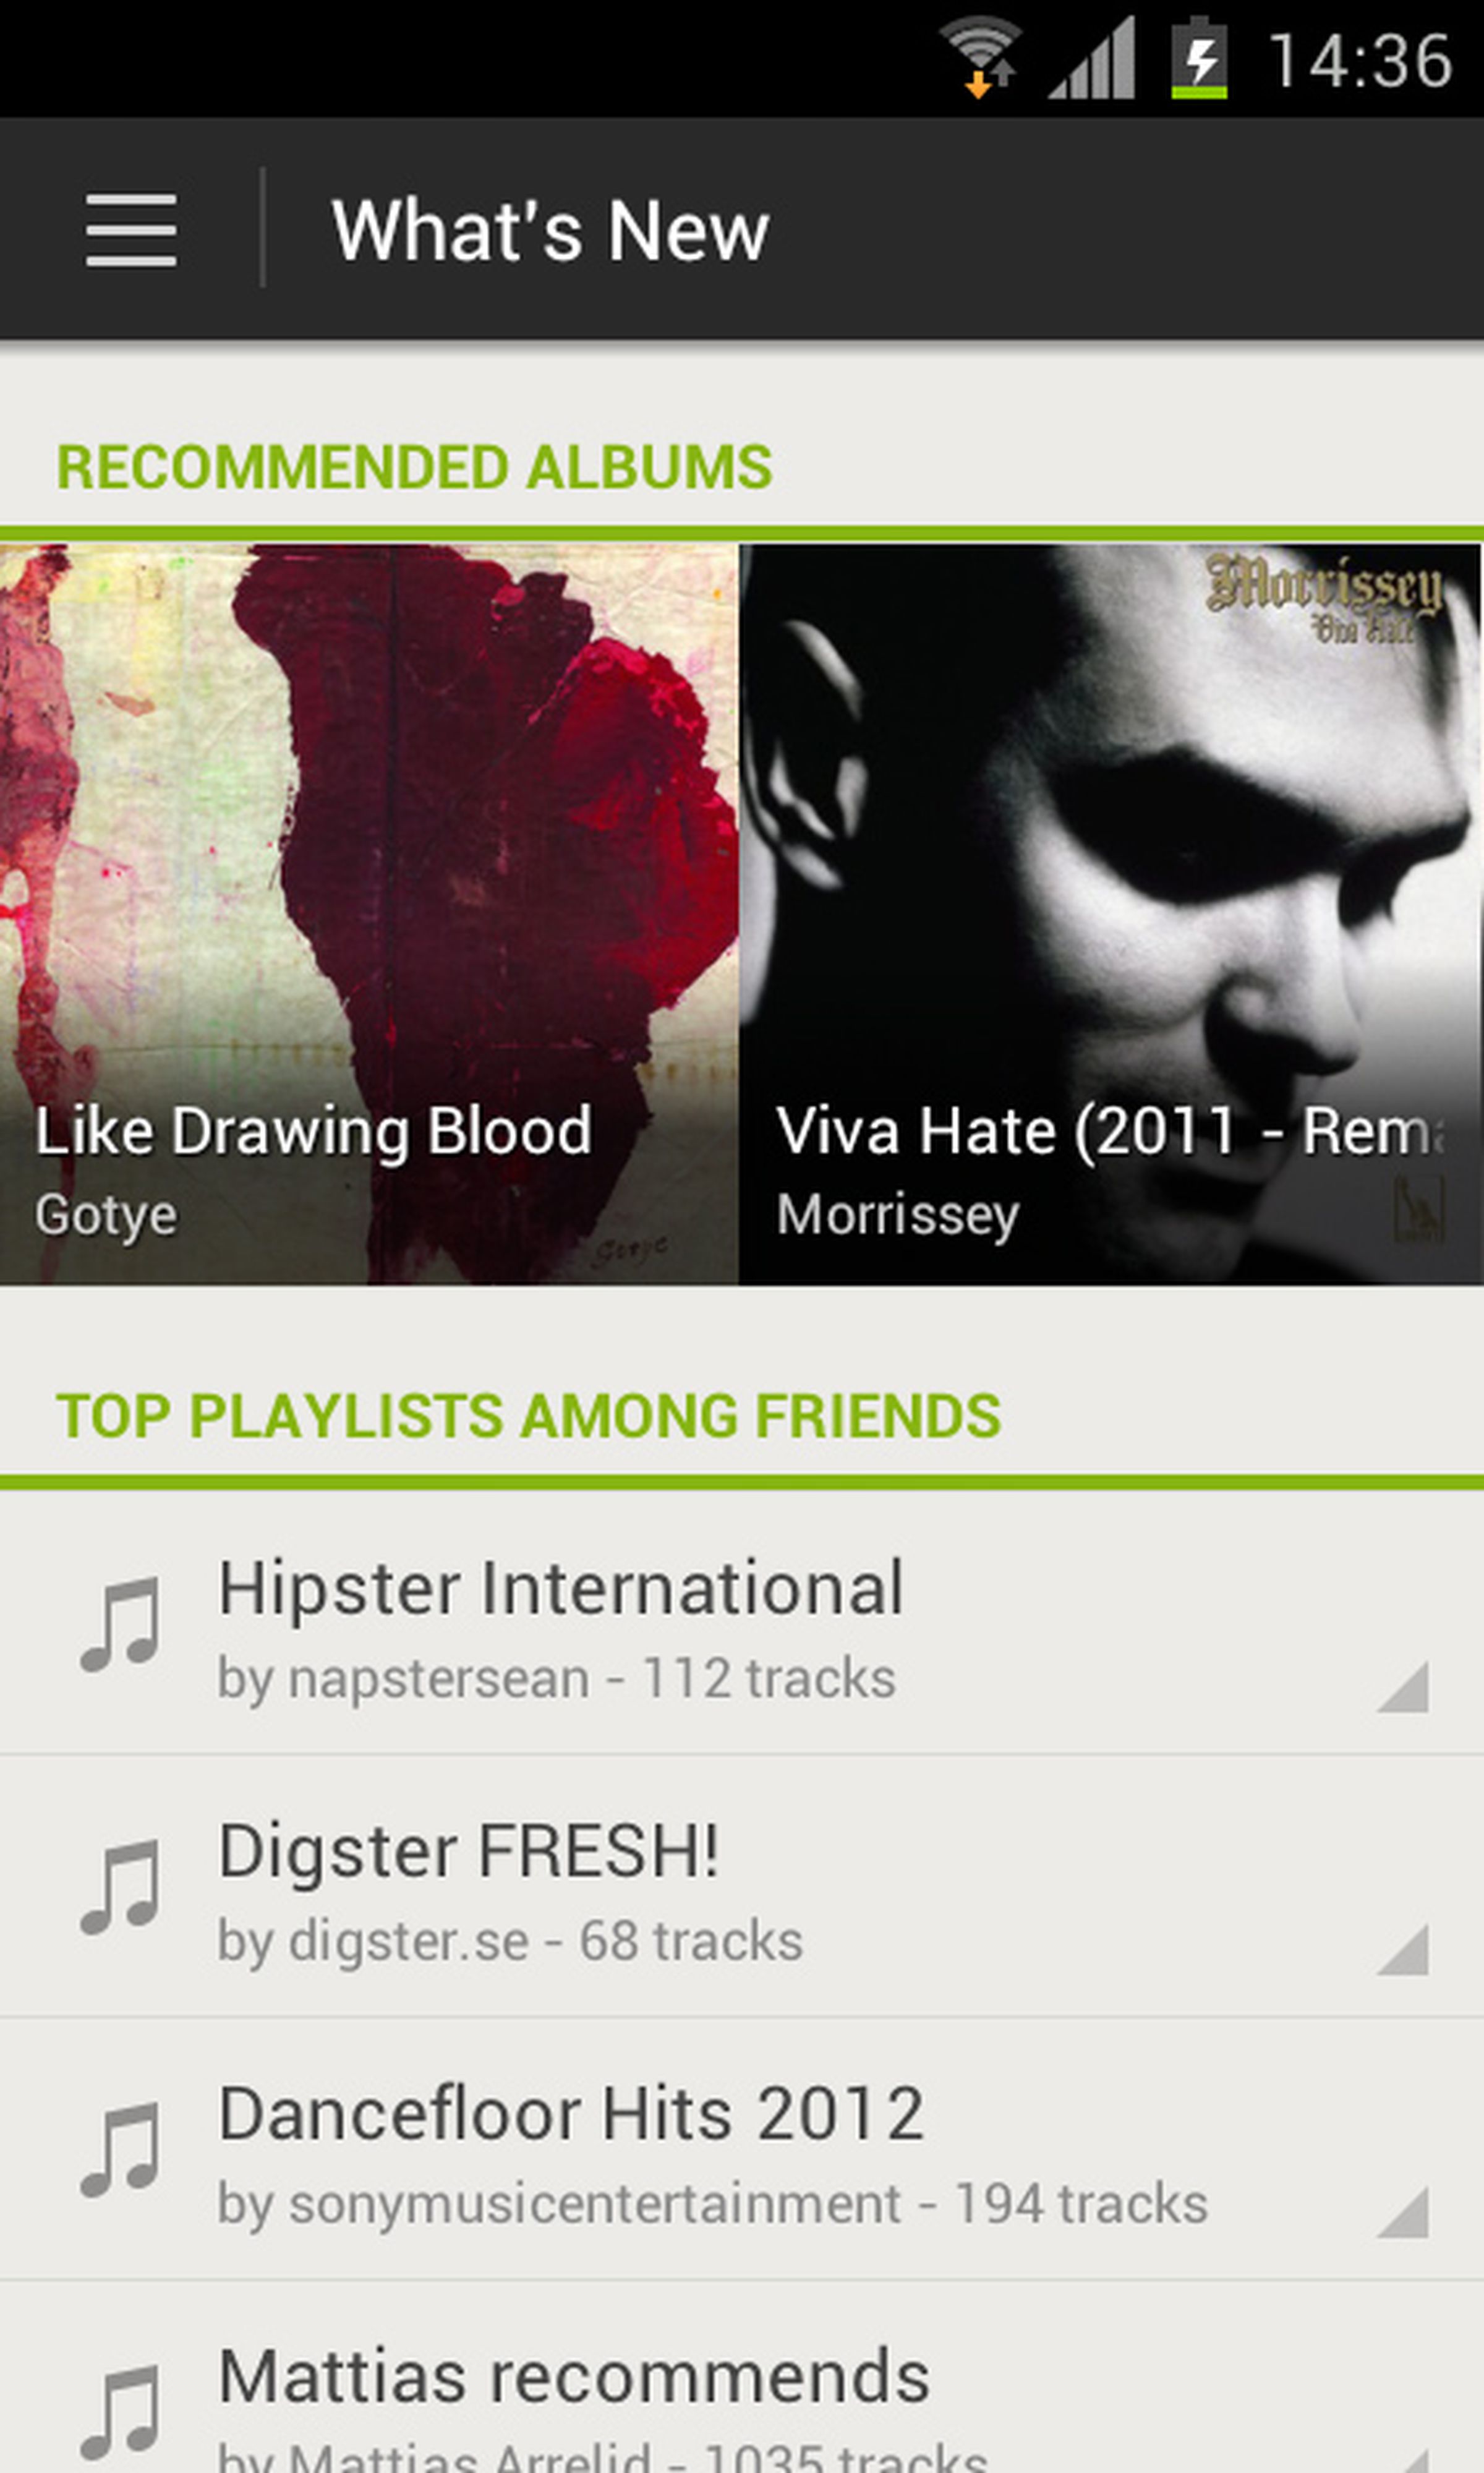 Spotify for Android 4.0 beta screenshots